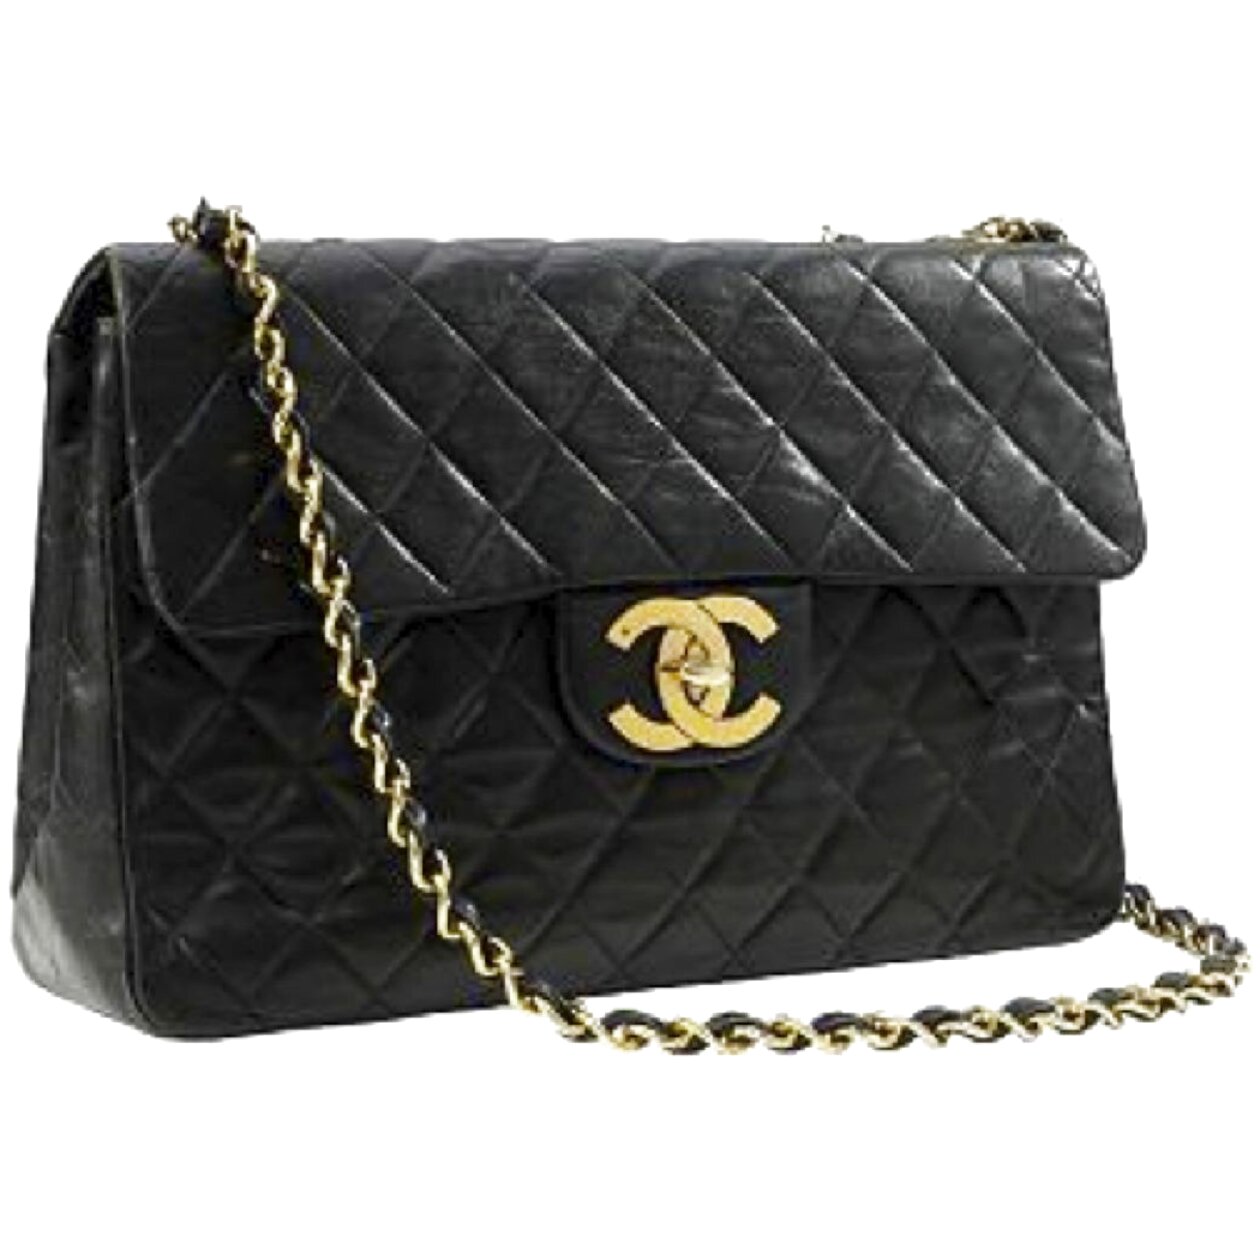 Coco Chanel Handbags for sale in UK | View 48 bargains